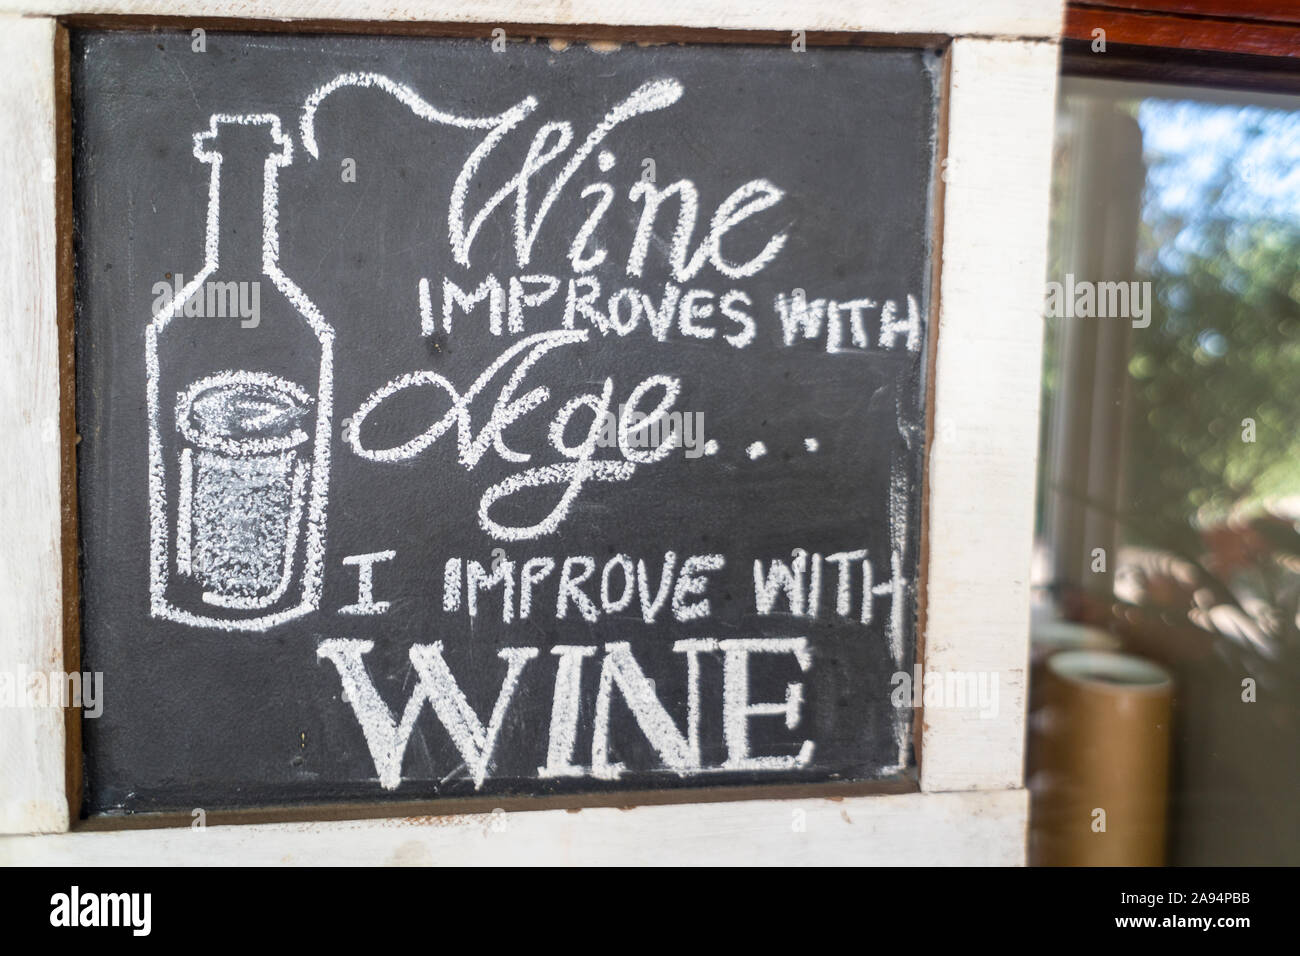 humorous, funny, quirky sayings, anecdotes, messages written on a chalkboard in white chalk about wine at a wine estate concept wine lifestyle Stock Photo